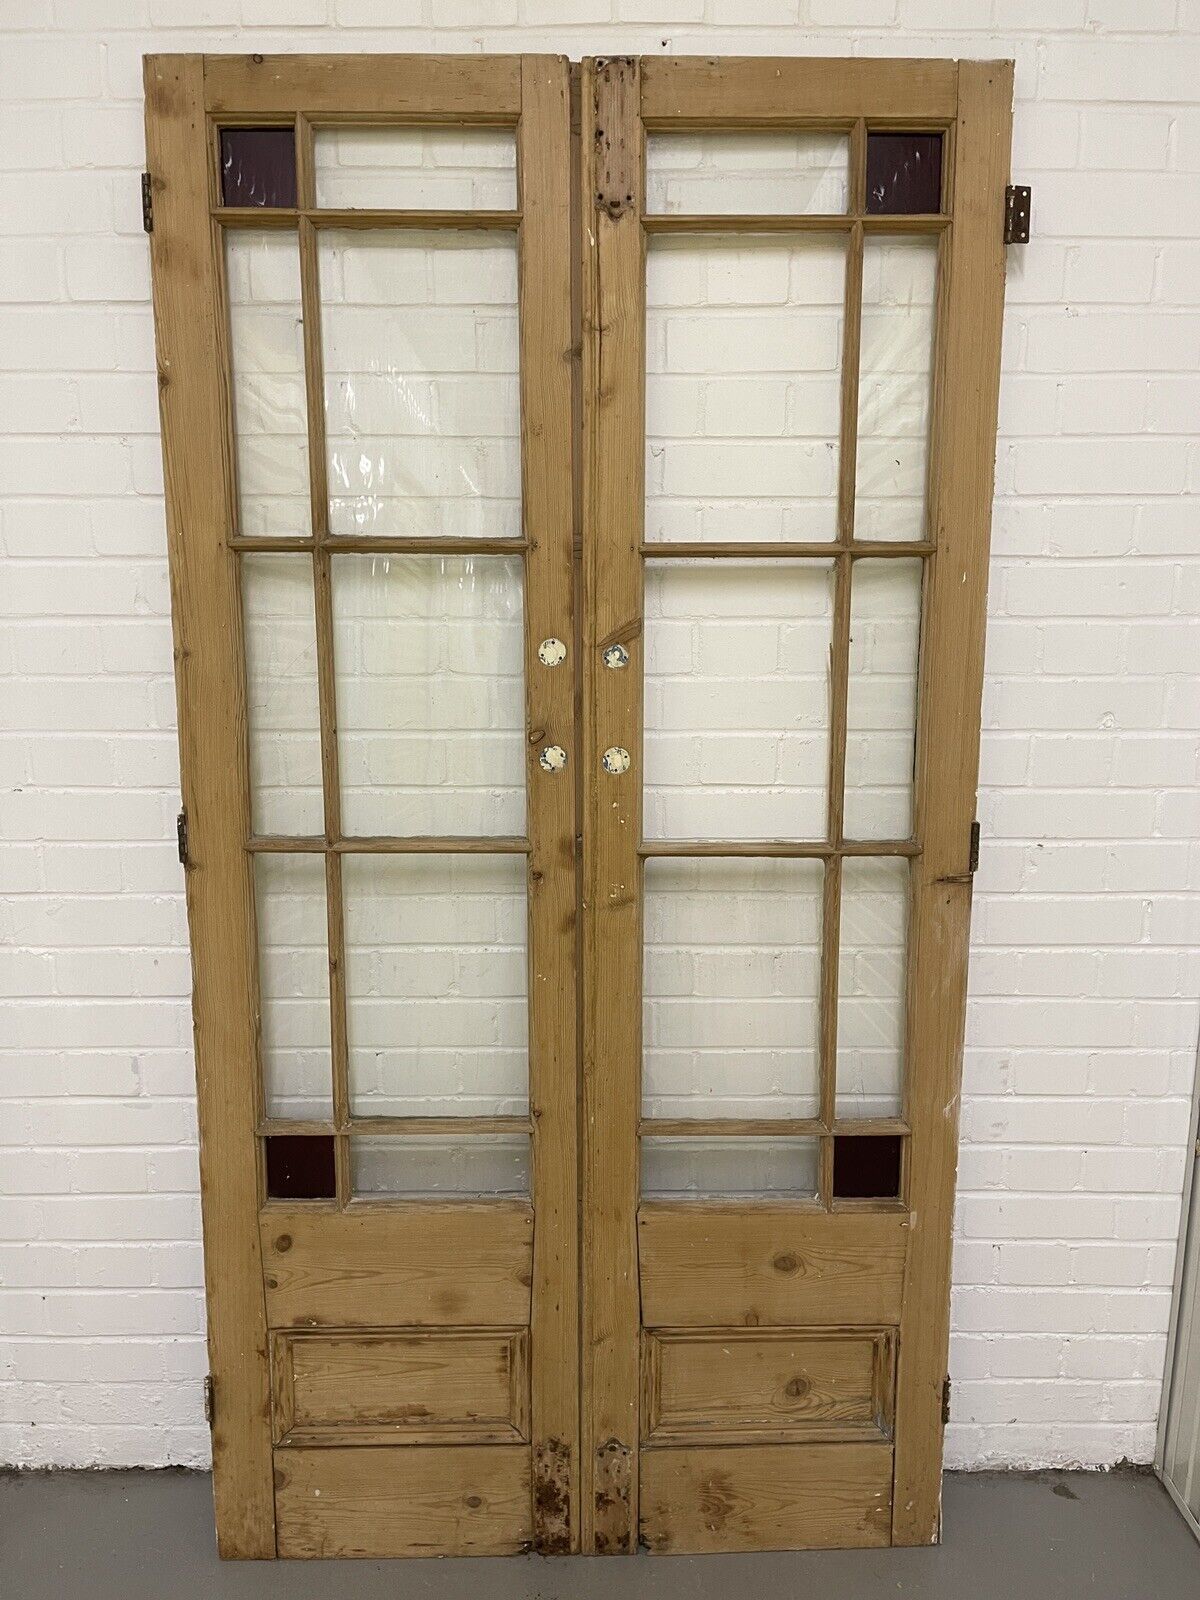 Reclaimed Old French Single Panel Glass Wooden Double Doors 1950 x 1020mm